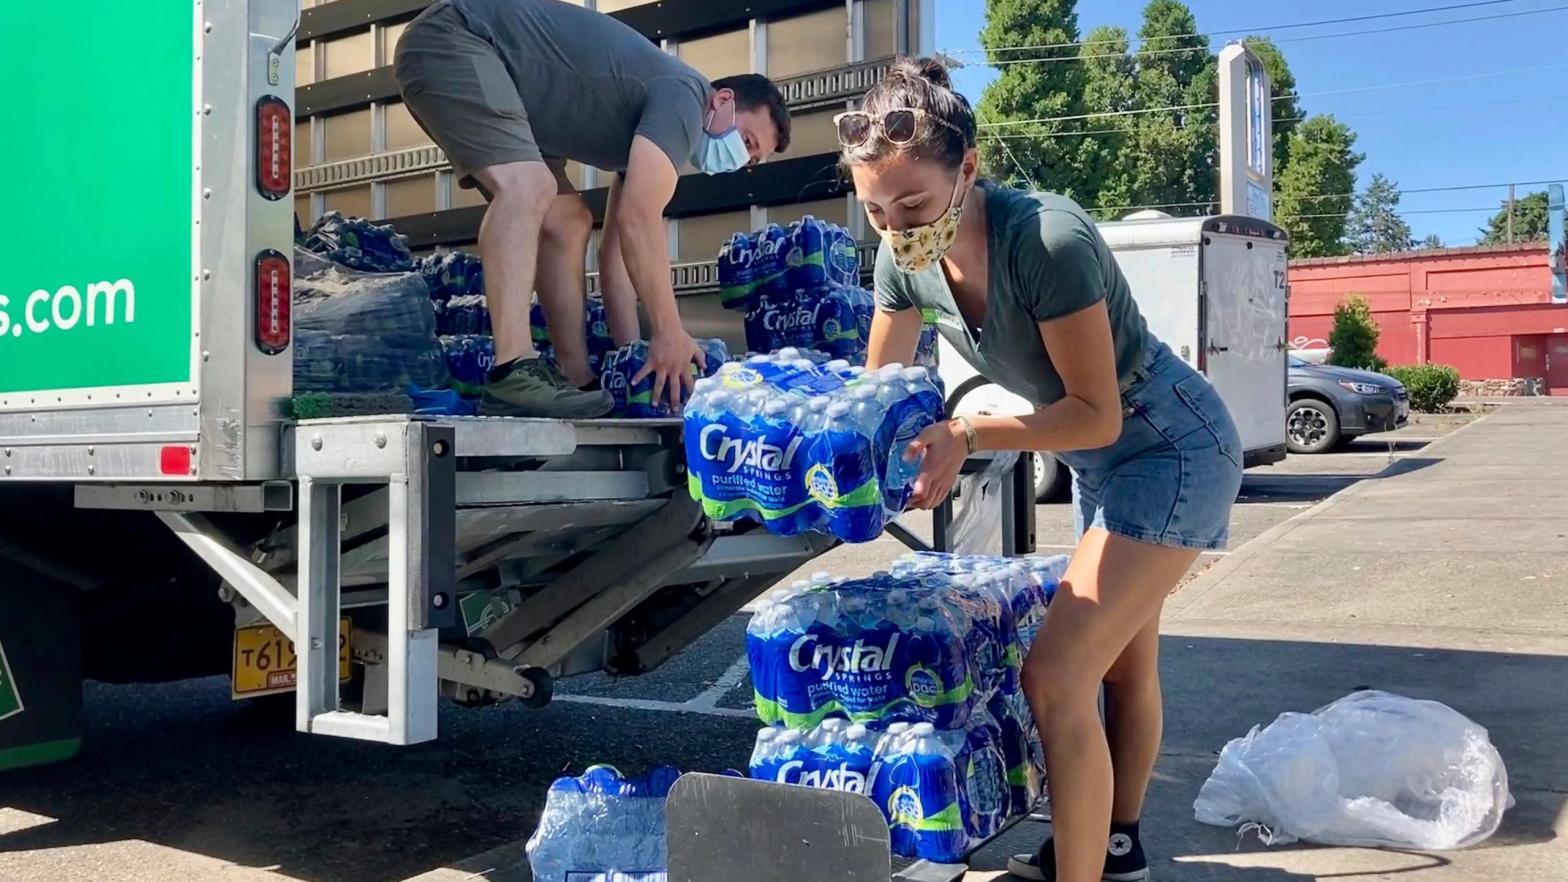 Volunteers and Multnomah County employees unload cases of water to supply a 24-hour cooling centre set up in Portland, Oregon on Wednesday, Aug. 11, 2021. (Photo: Gillian Flaccus, AP)